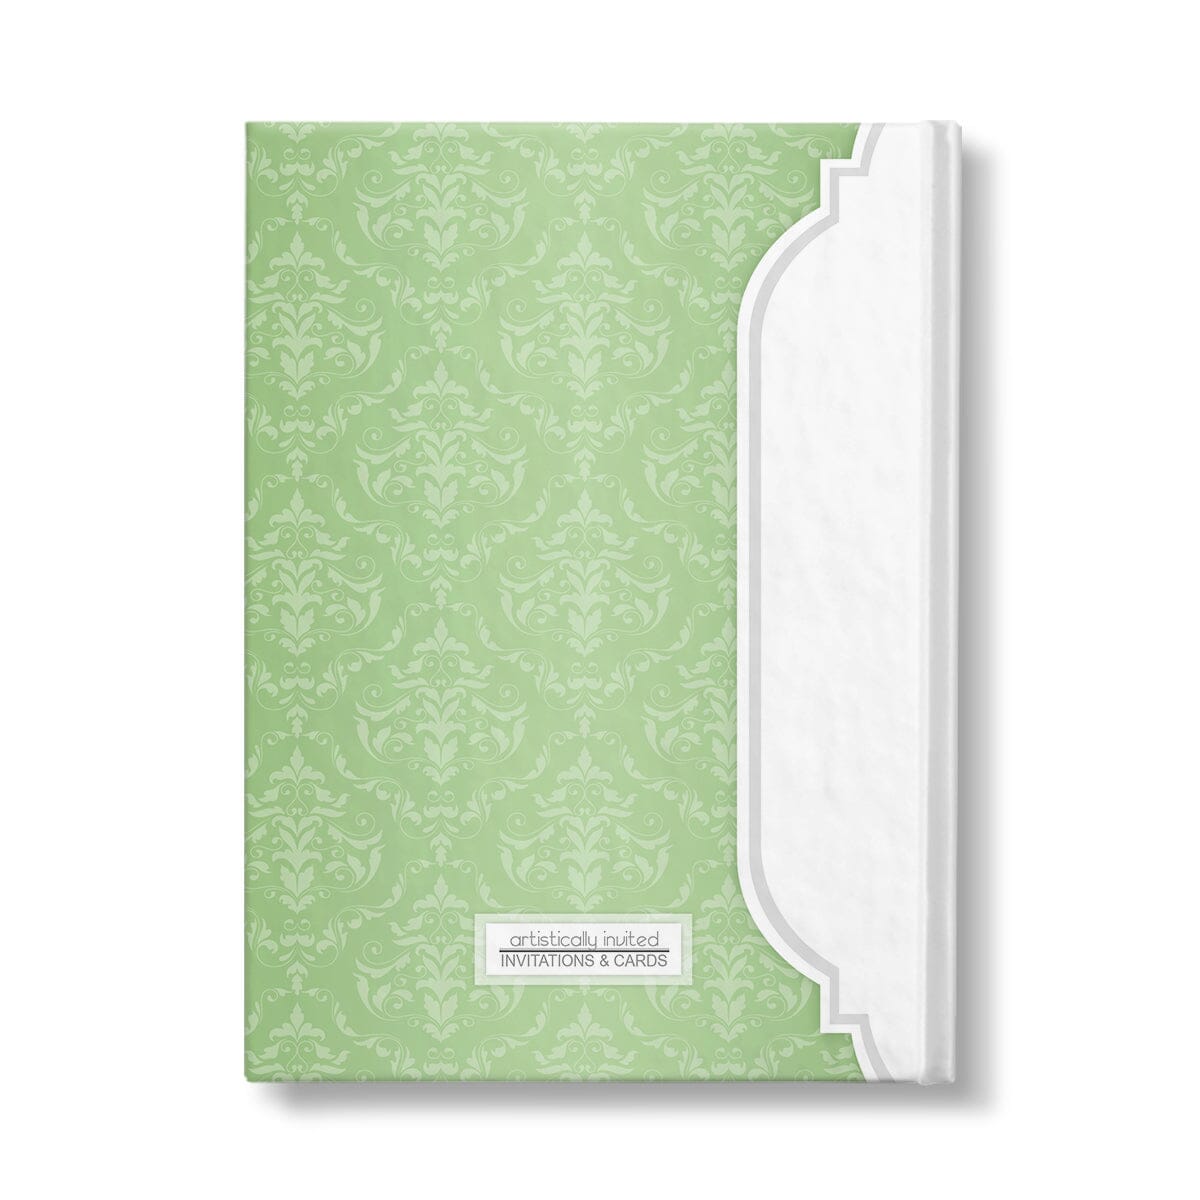 Personalized Green Damask Journal at Artistically Invited. Back side of the book.